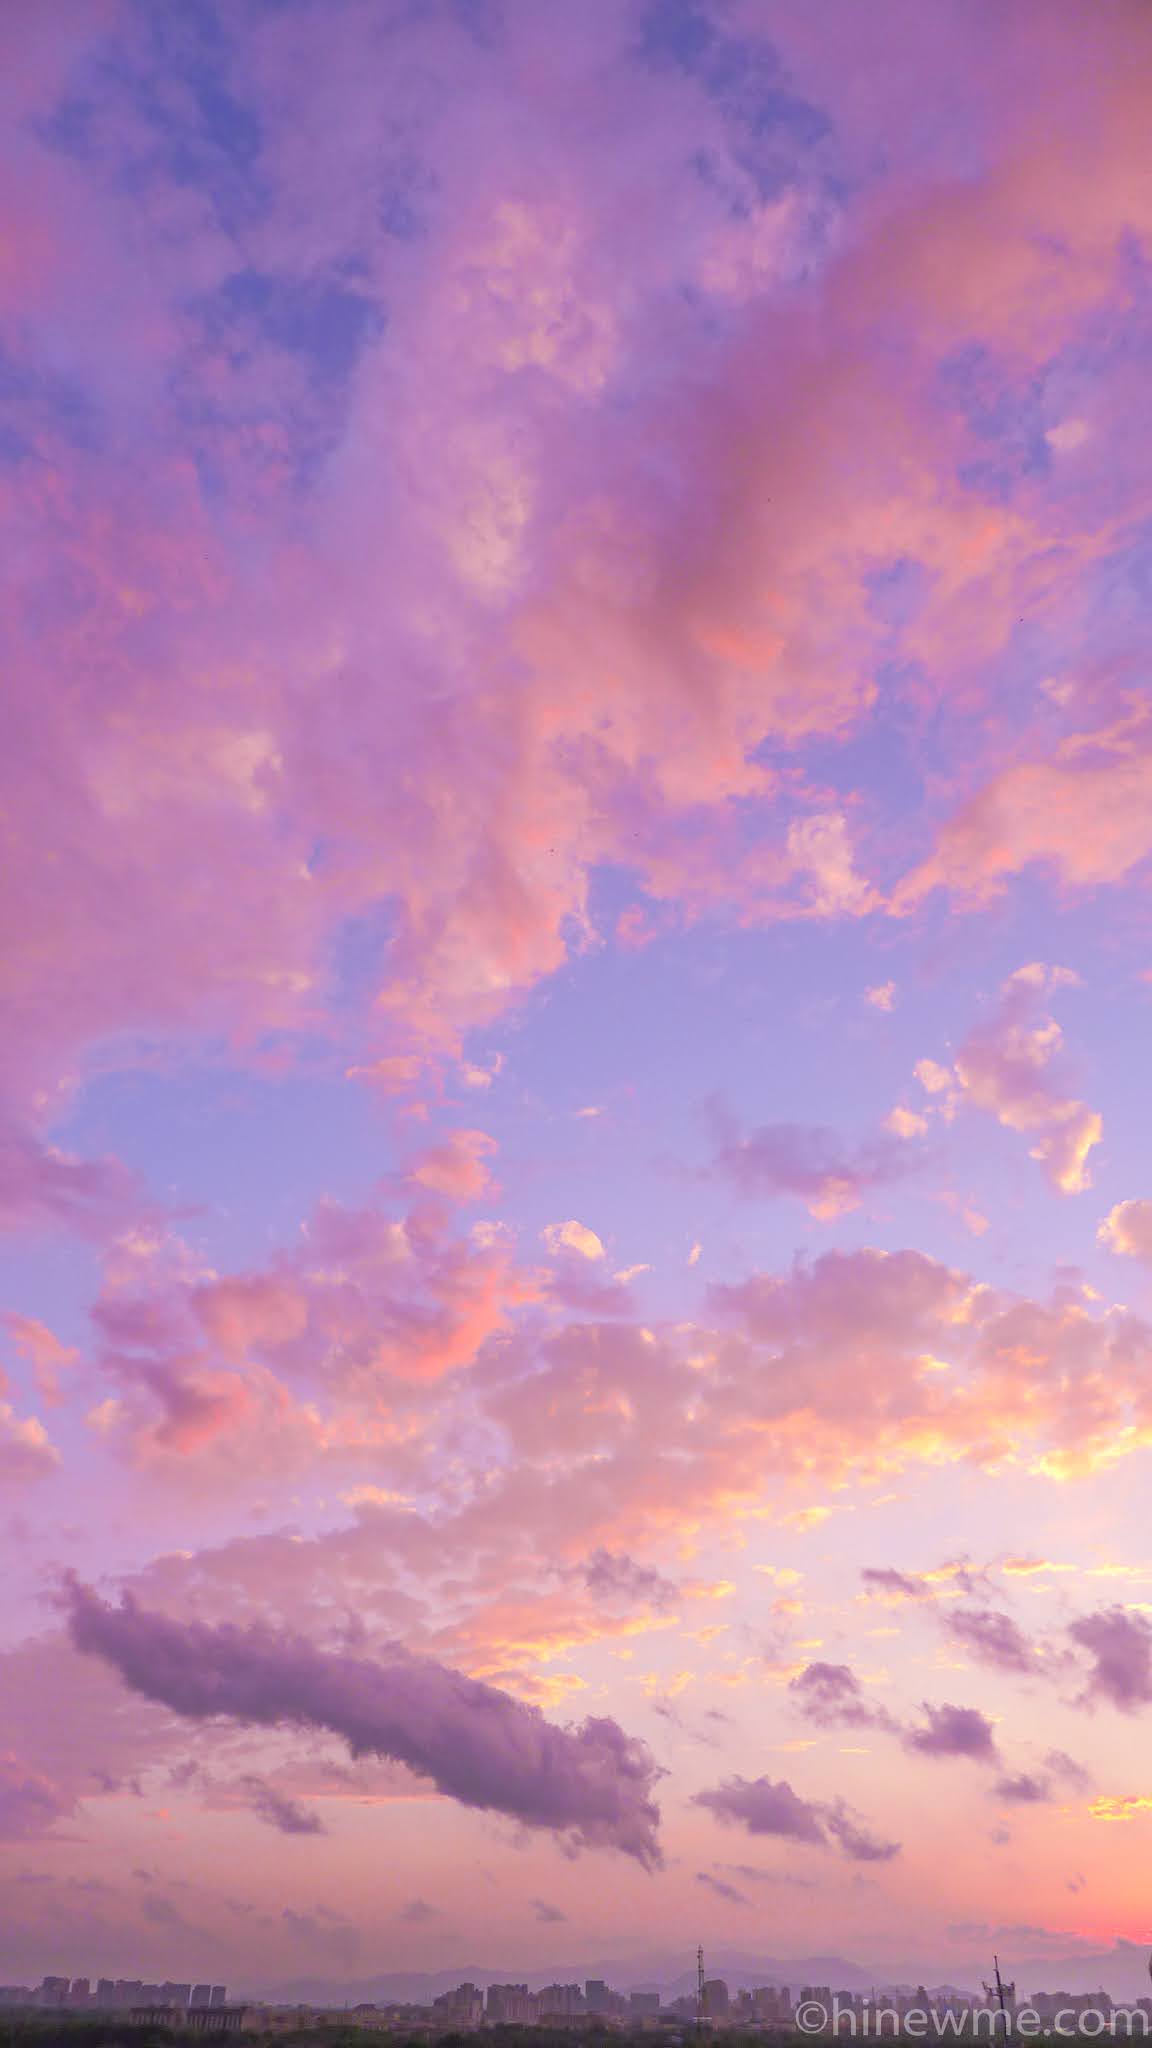 28sunset |sunset time | 5sunset photography tips The pink and purple ...